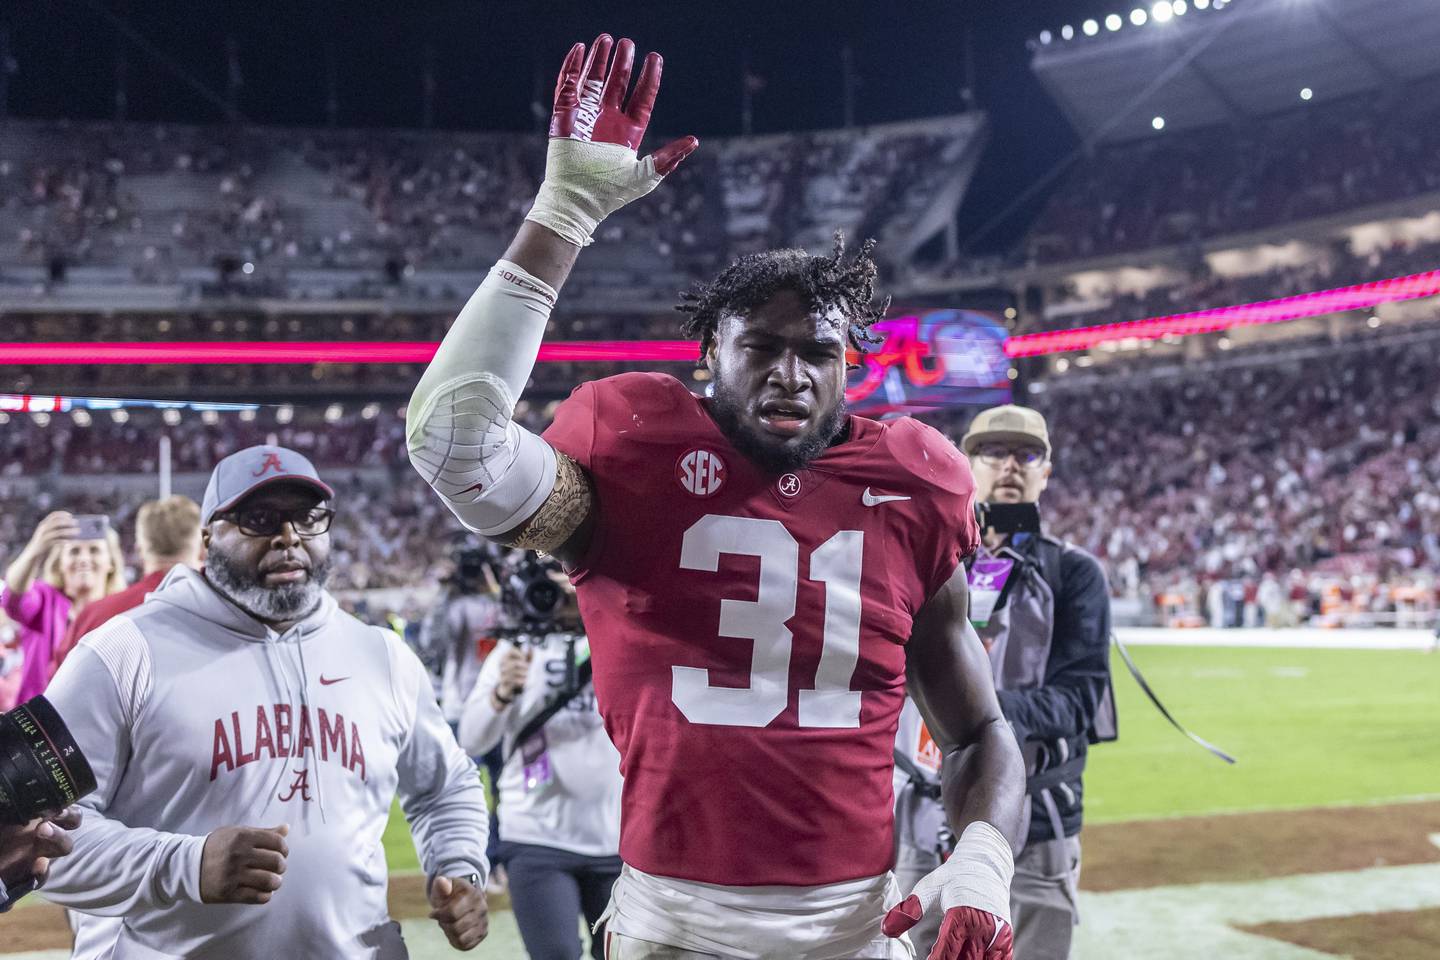 Alabama linebacker Will Anderson Jr. waves to fans as he leaves the field after the team's win over Texas A&M on Saturday in Tuscaloosa, Alabama